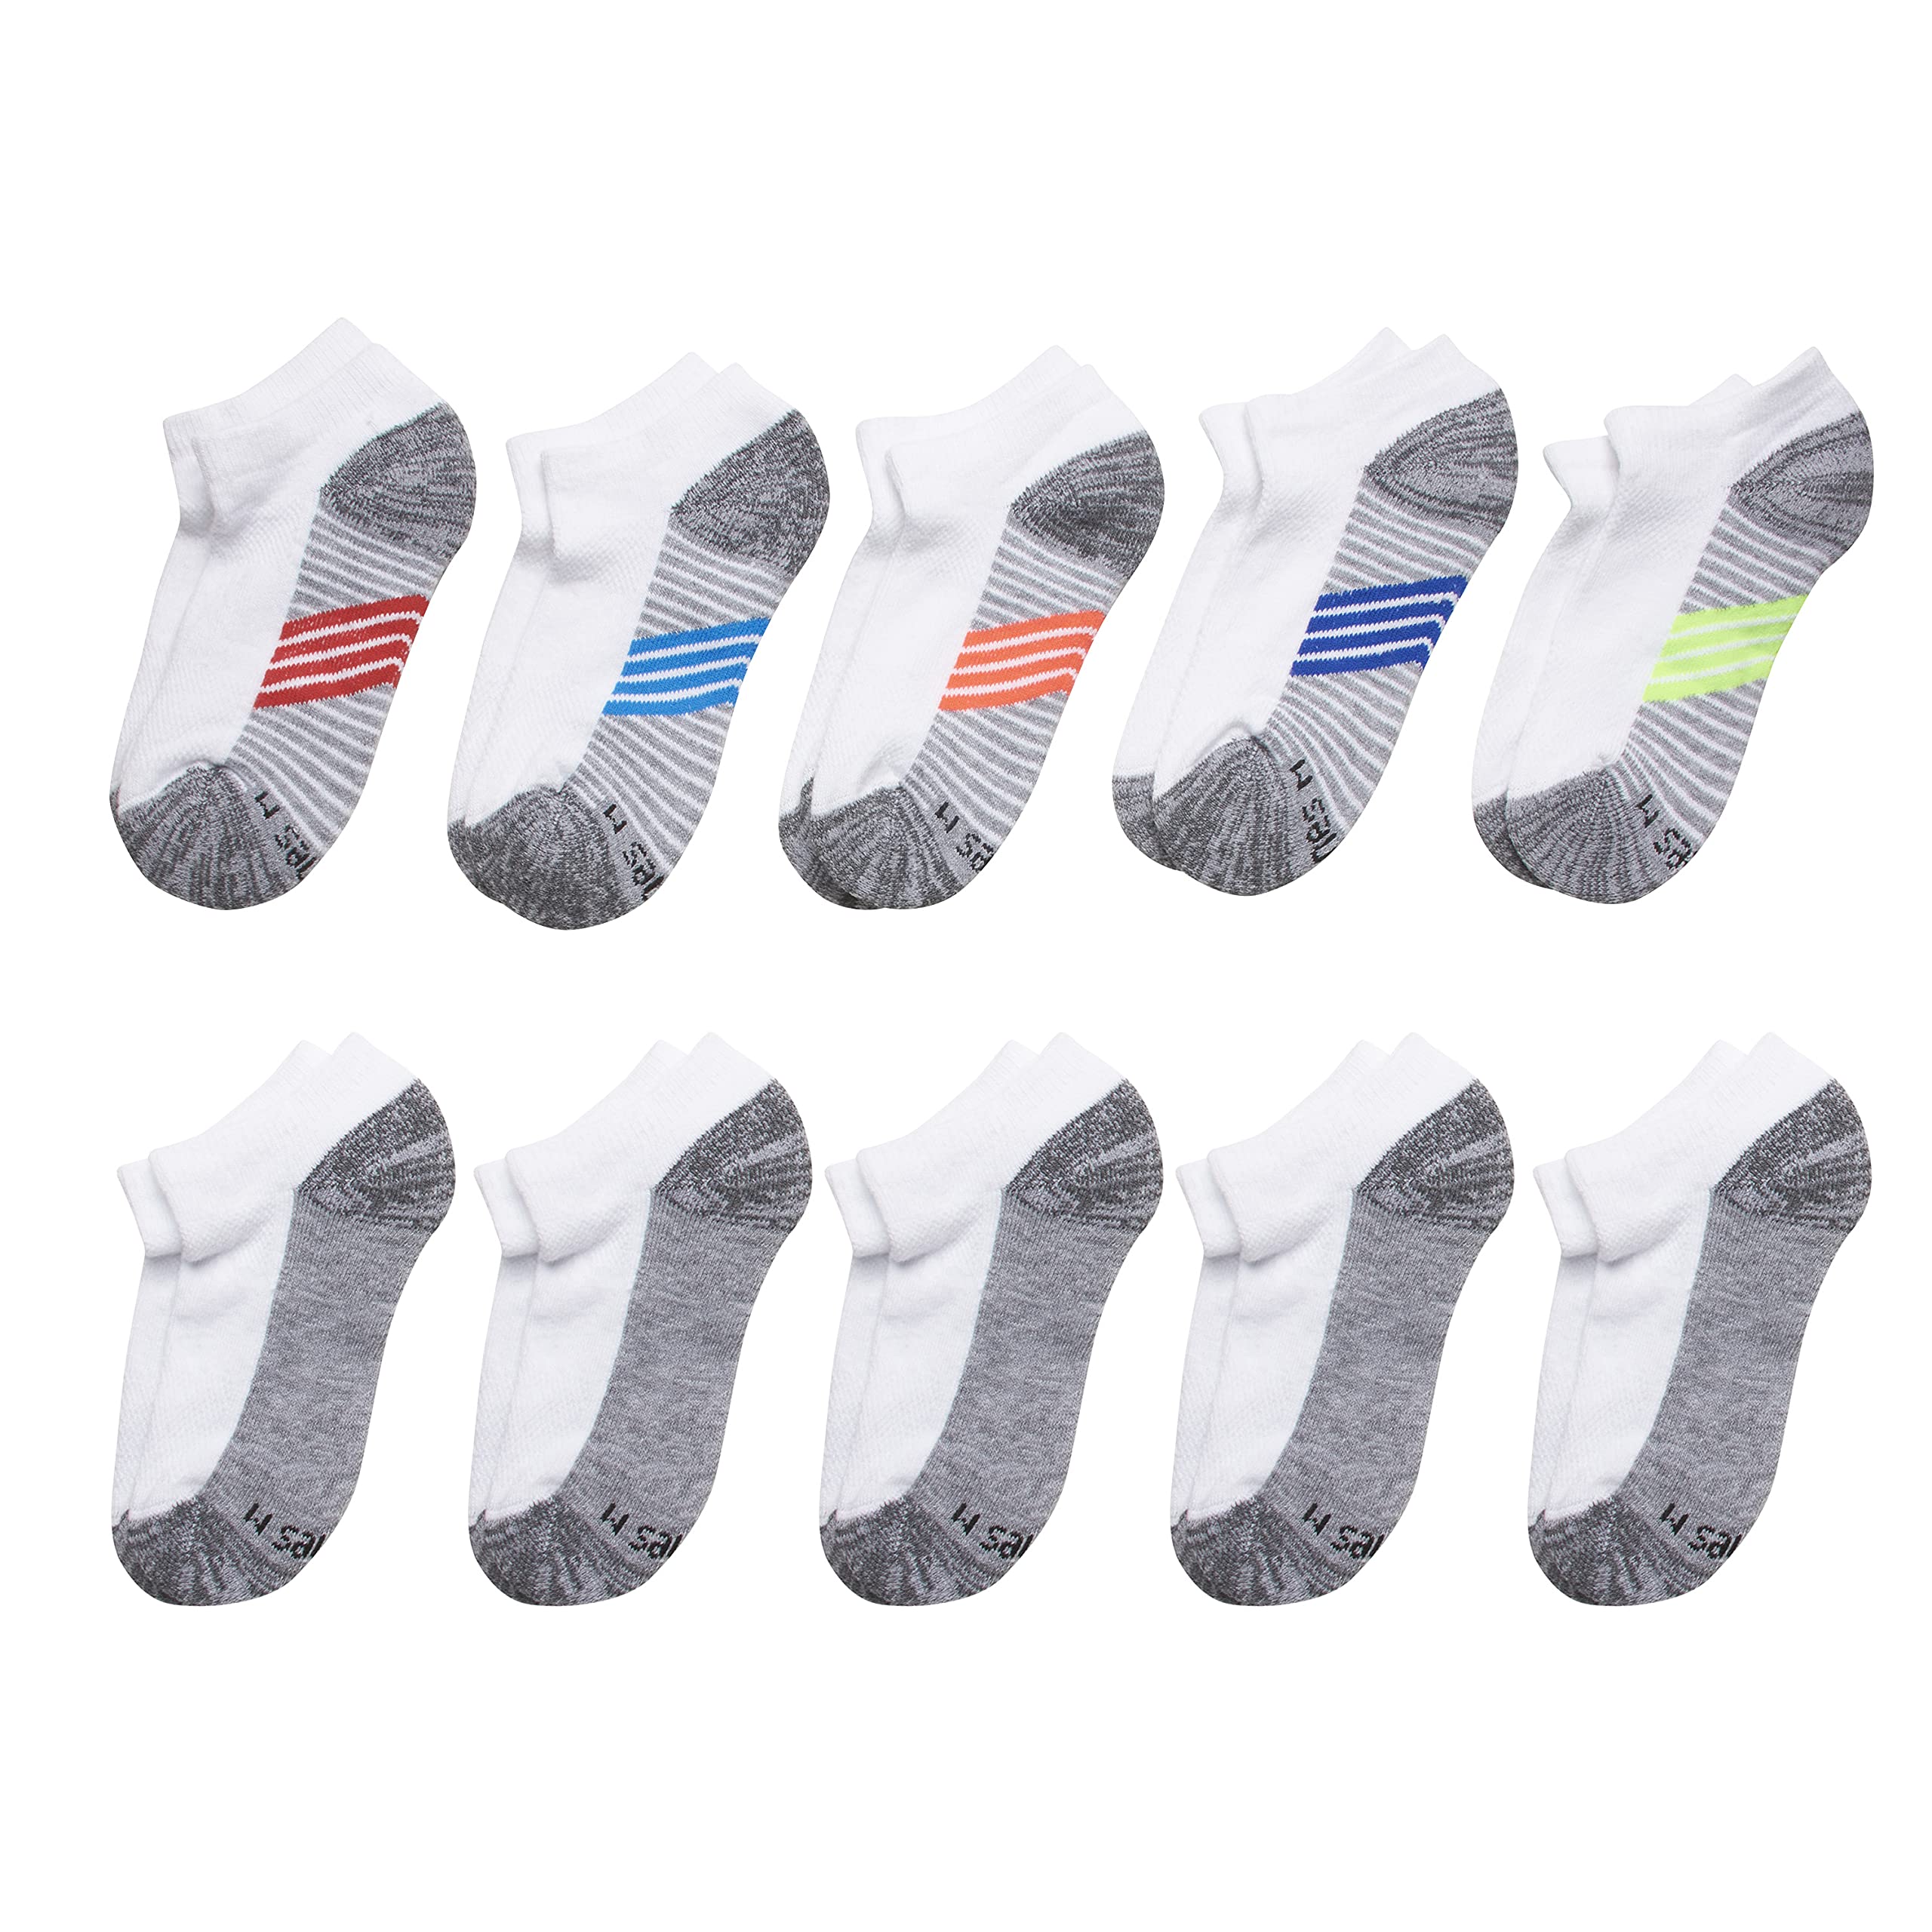 Hanes Ultimate Boys' Ankle and No Show Performance Sport Socks, 10-Pair Packs